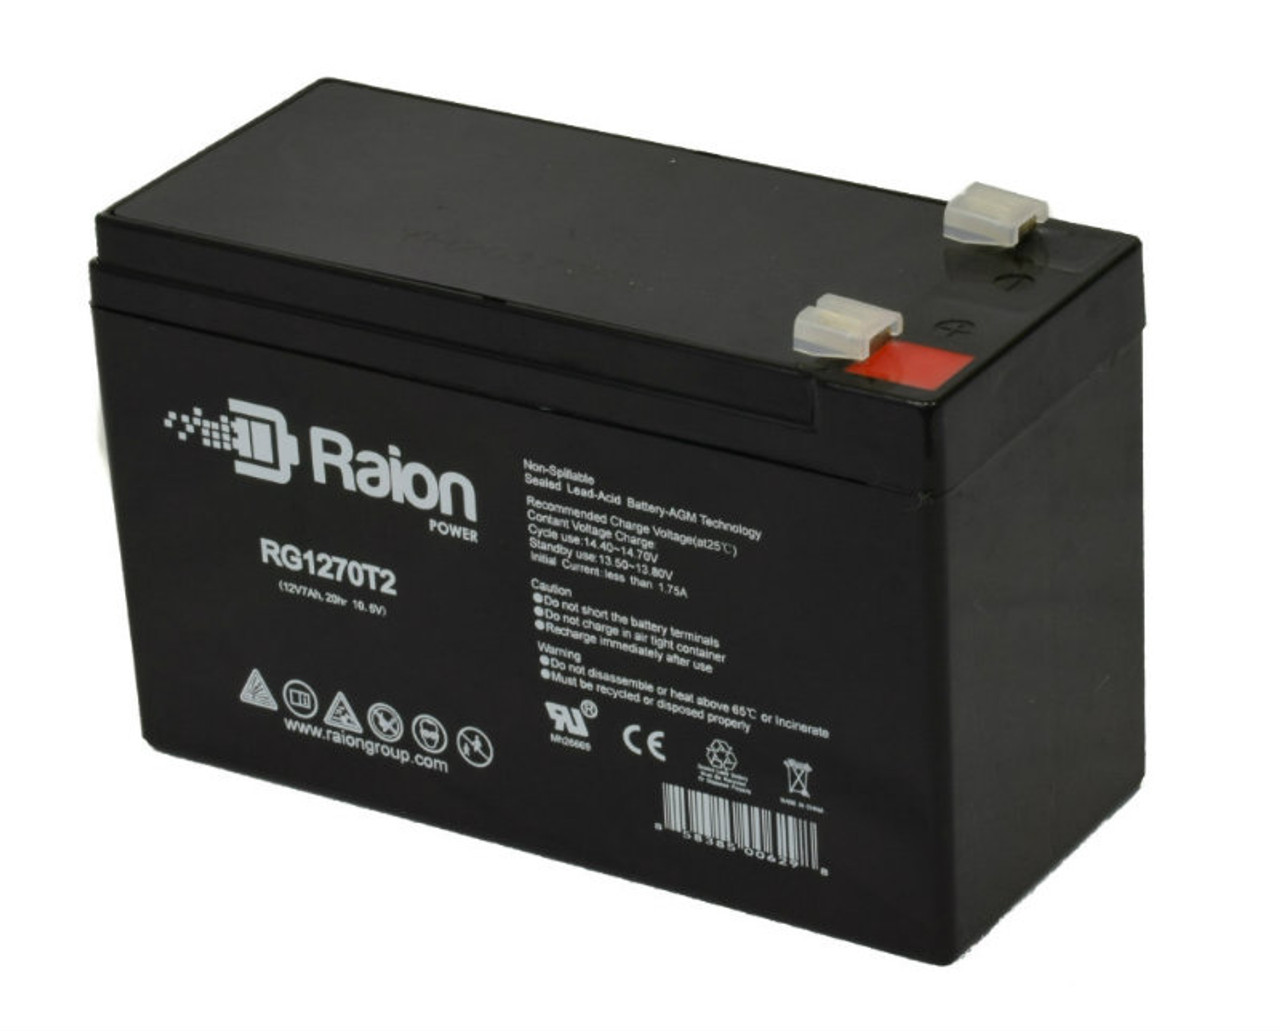 Raion Power RG1270T2 12V 7Ah Rechargeable Battery for Yuntong YT-1270-F2